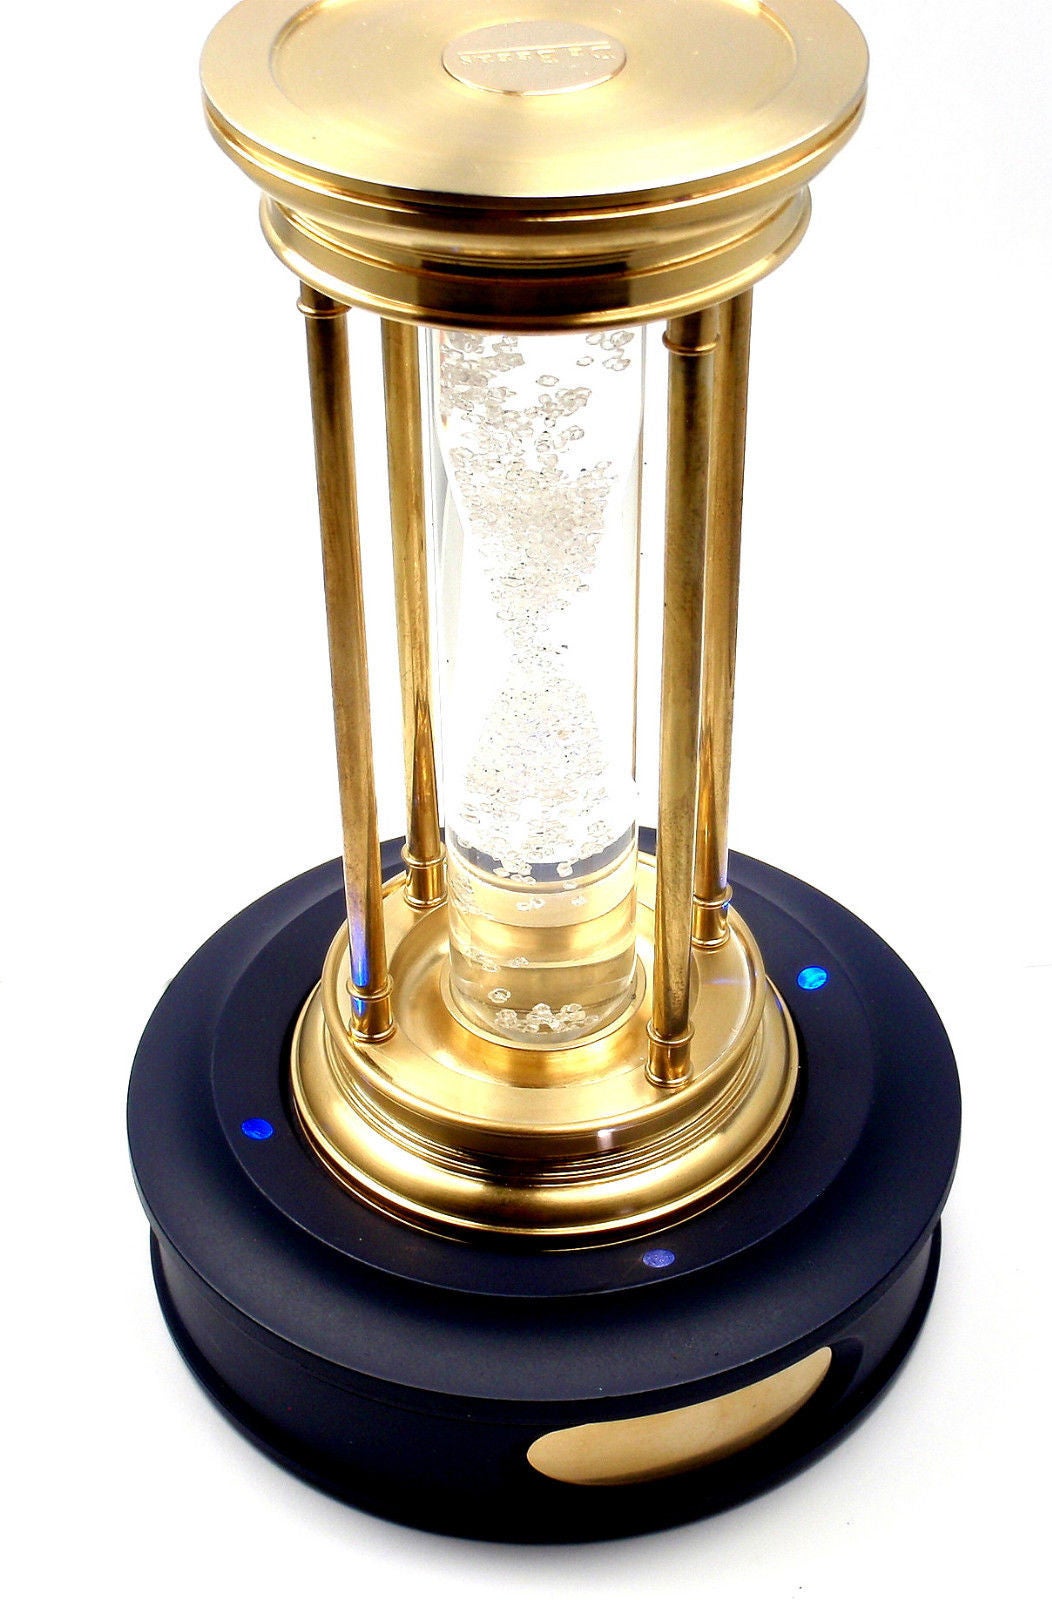 Very Rare! Limited Edition Millennium 2000 Diamond Brass Hourglass Timer  by De Beers.
This item comes with a box, light does now work in a stand.
Containing a cascade of over 2000 natural rough diamonds, weighing approximately 36 carats, suspended